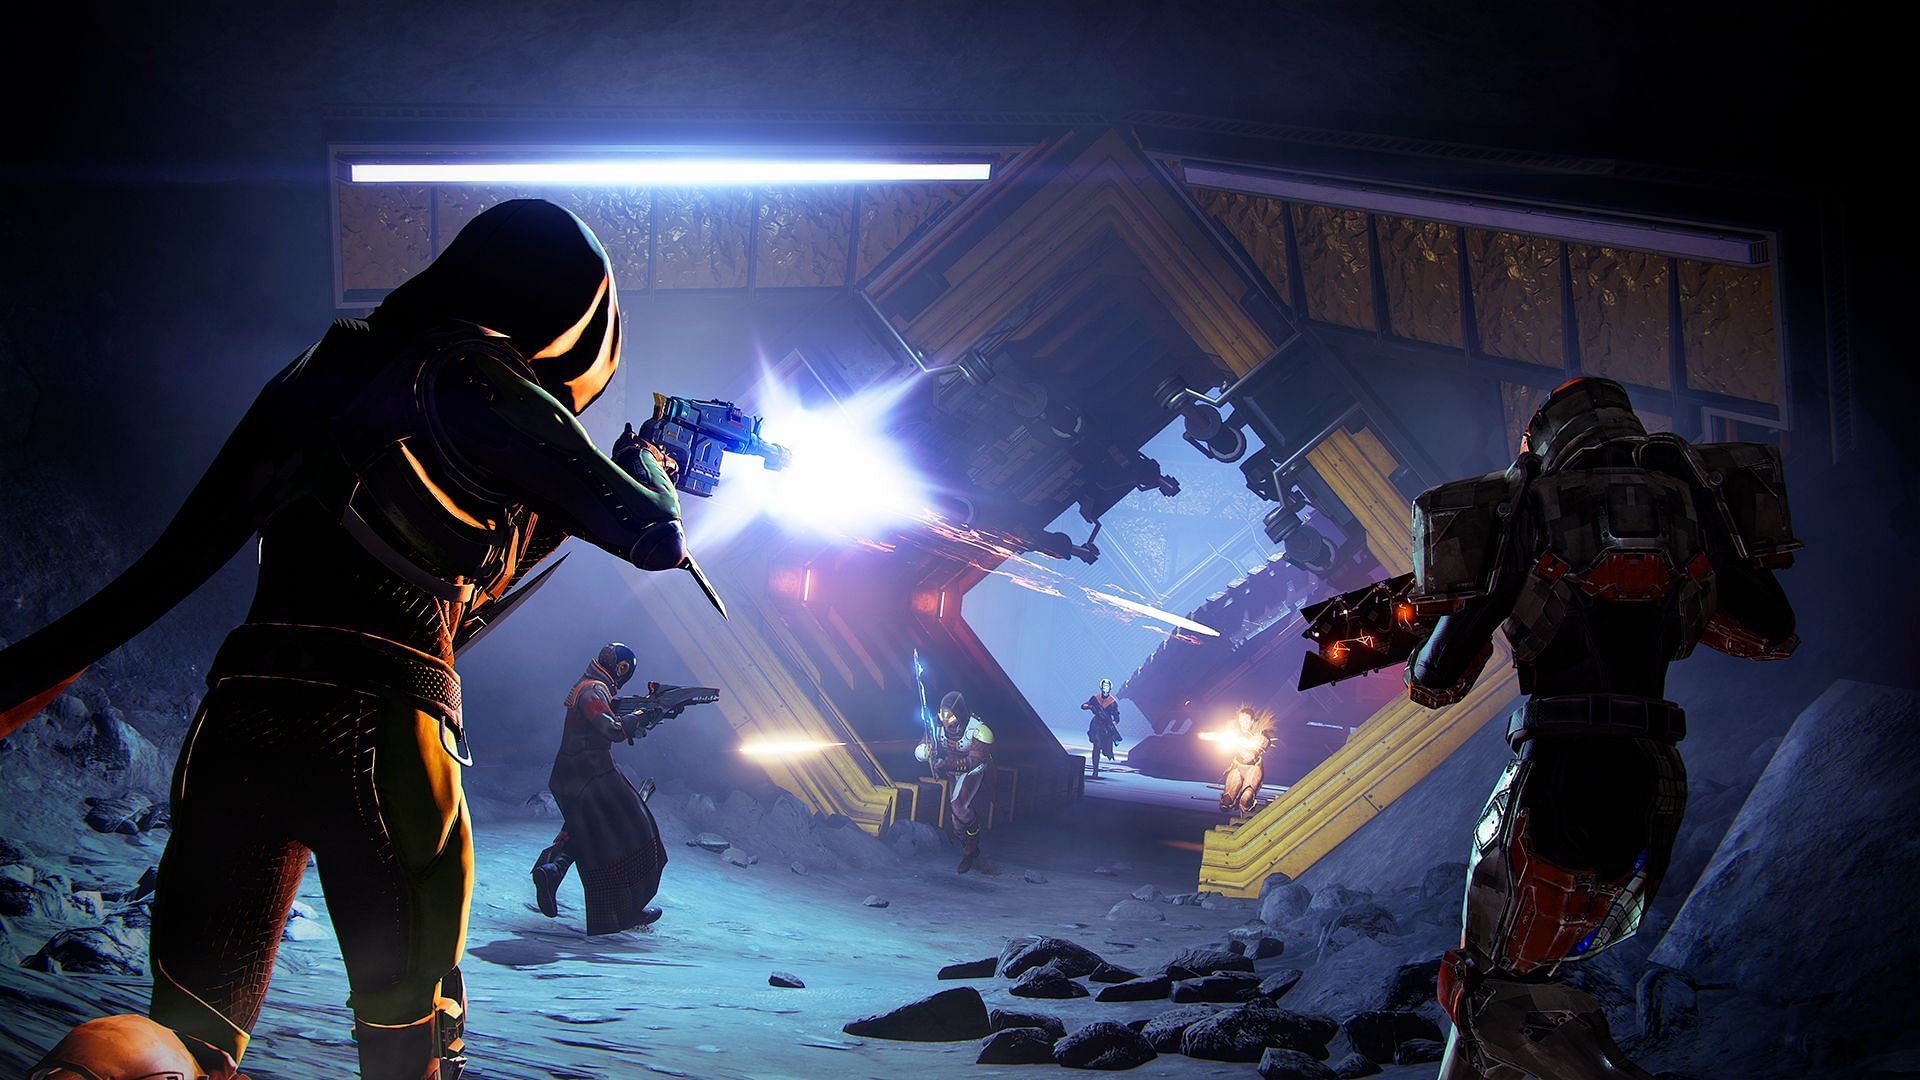 Destiny 2 players shooting each other in the Crucible PvP game mode 